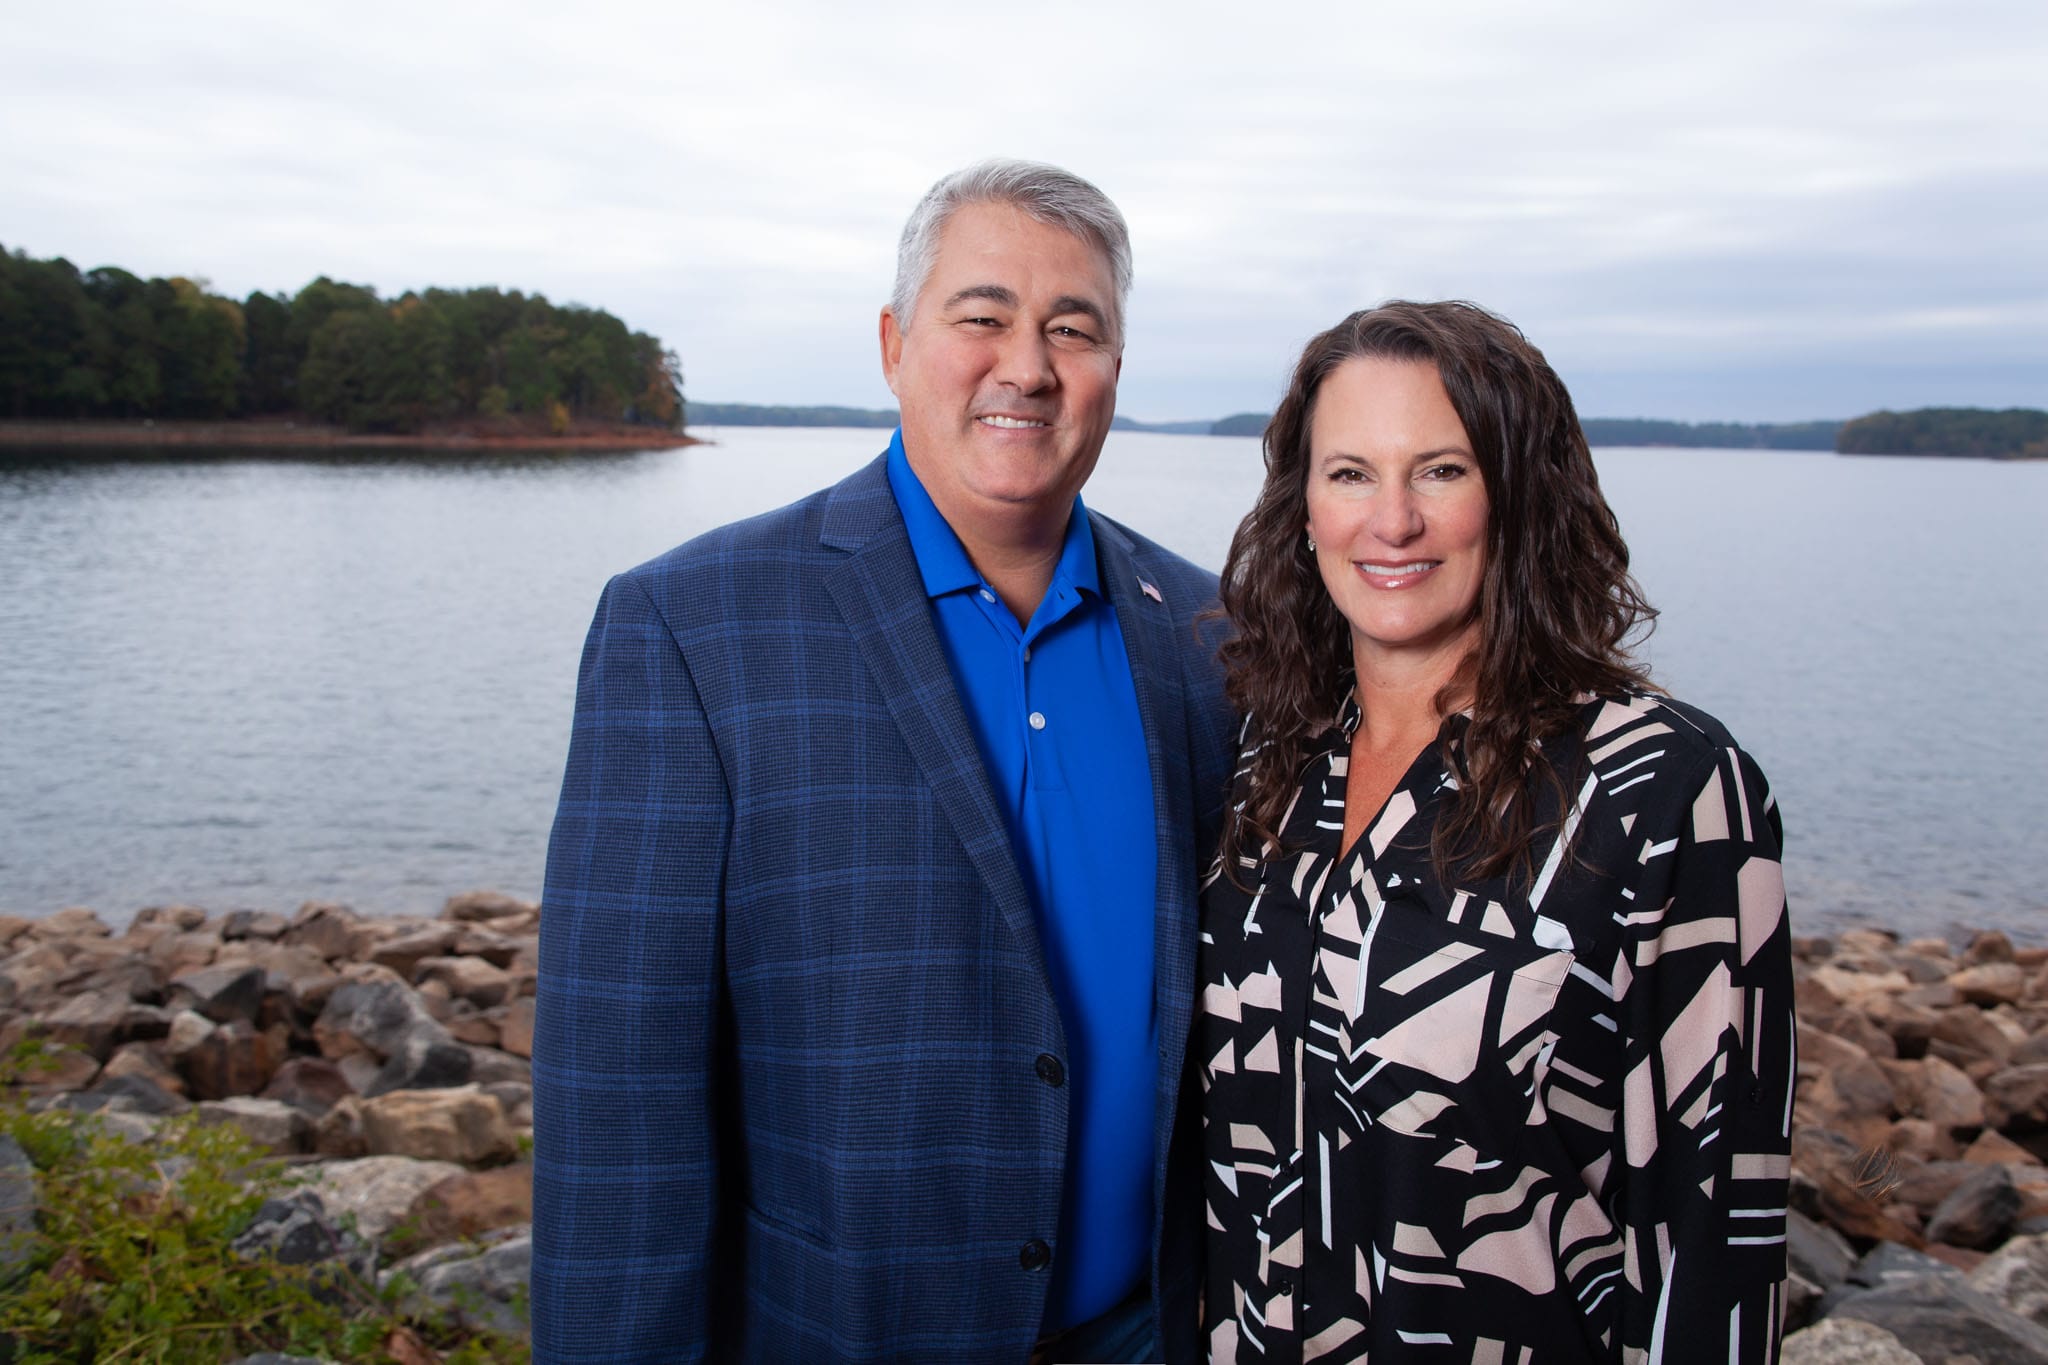 Lauren McDonald and wife, Claire, standing together at Lake Lanier.